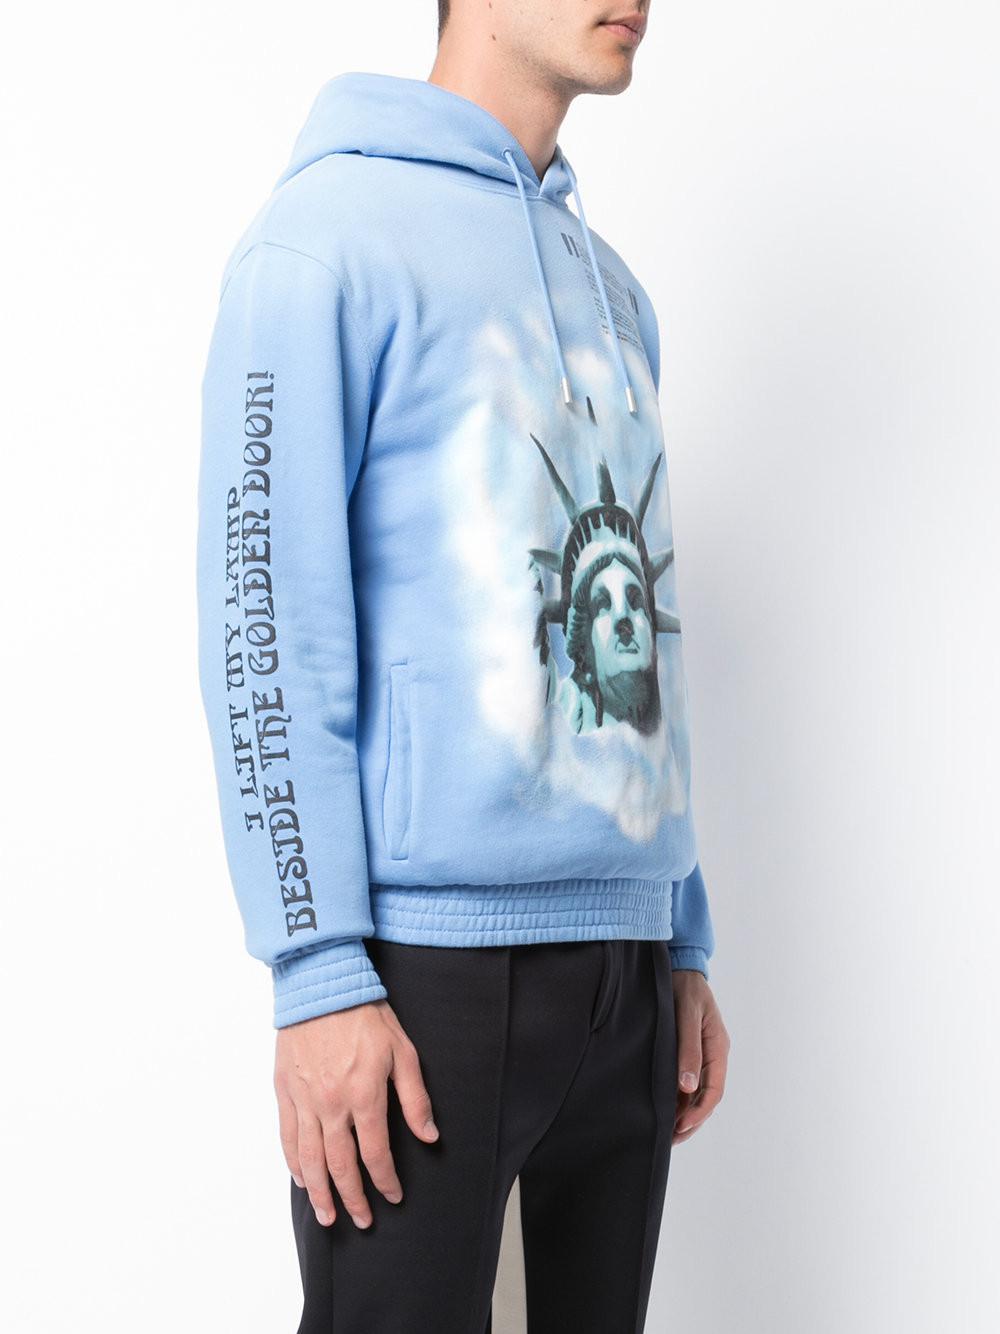 Off-White c/o Virgil Abloh Statue Of Liberty Hoodie in Blue for Men